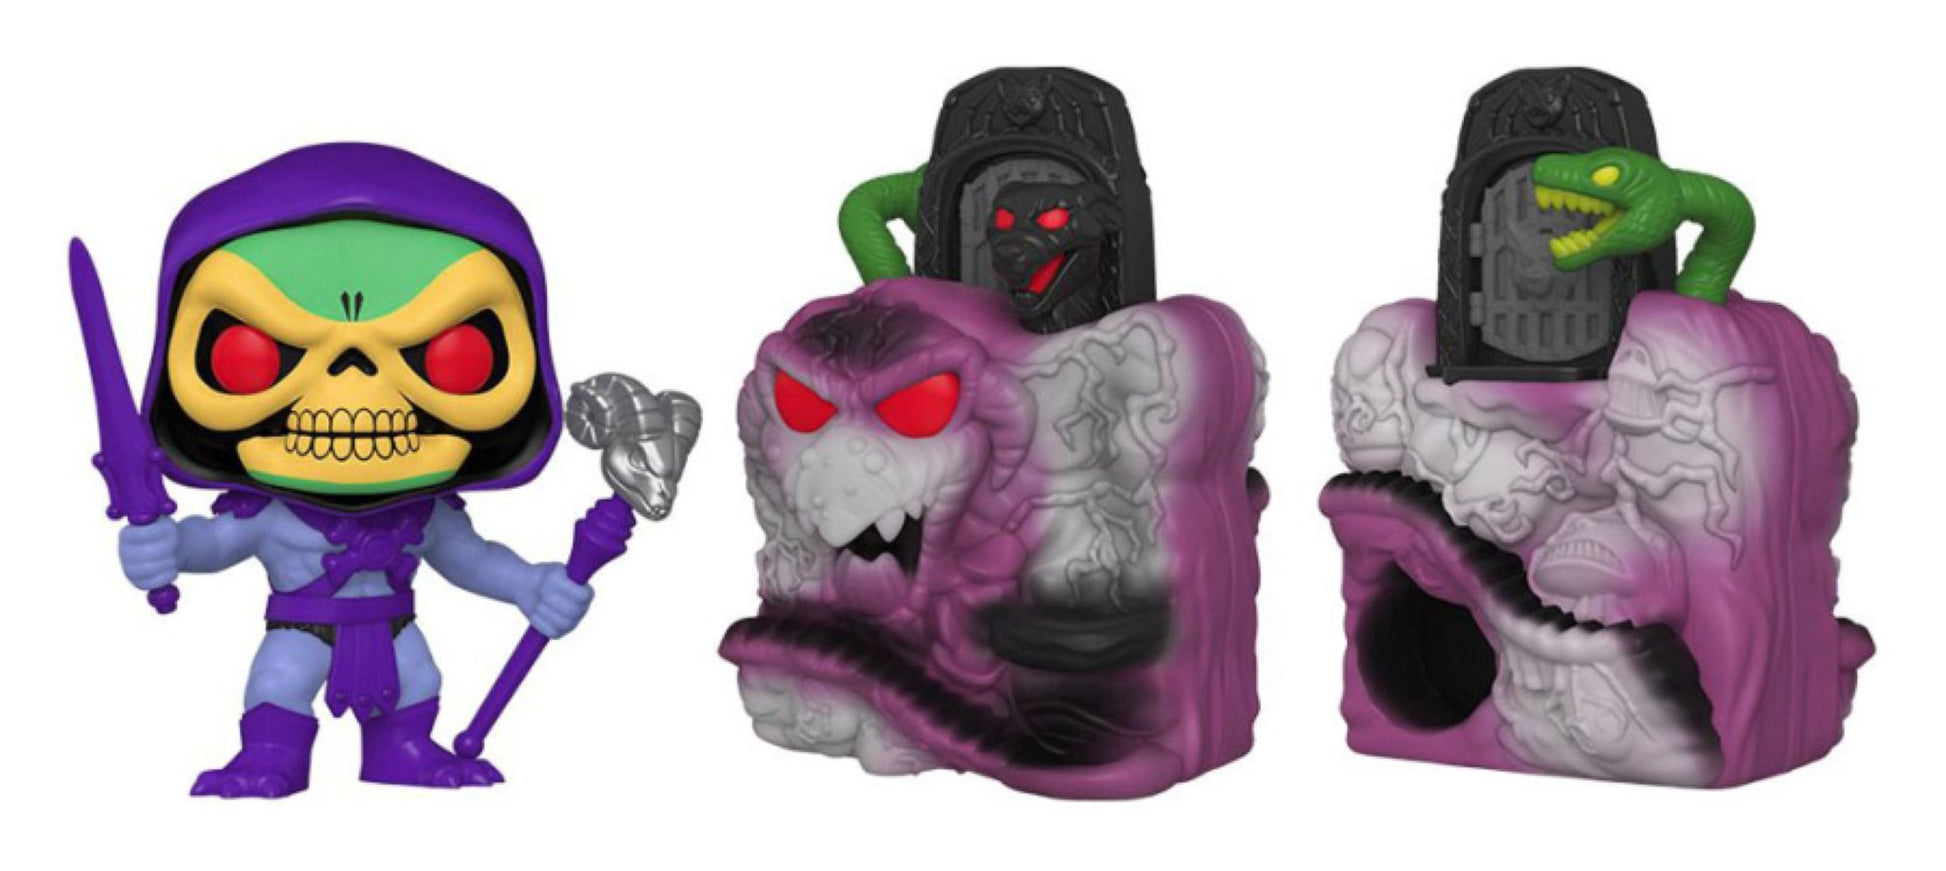 Masters of the Universe - Snake Mountain with Skeletor Pop! Town